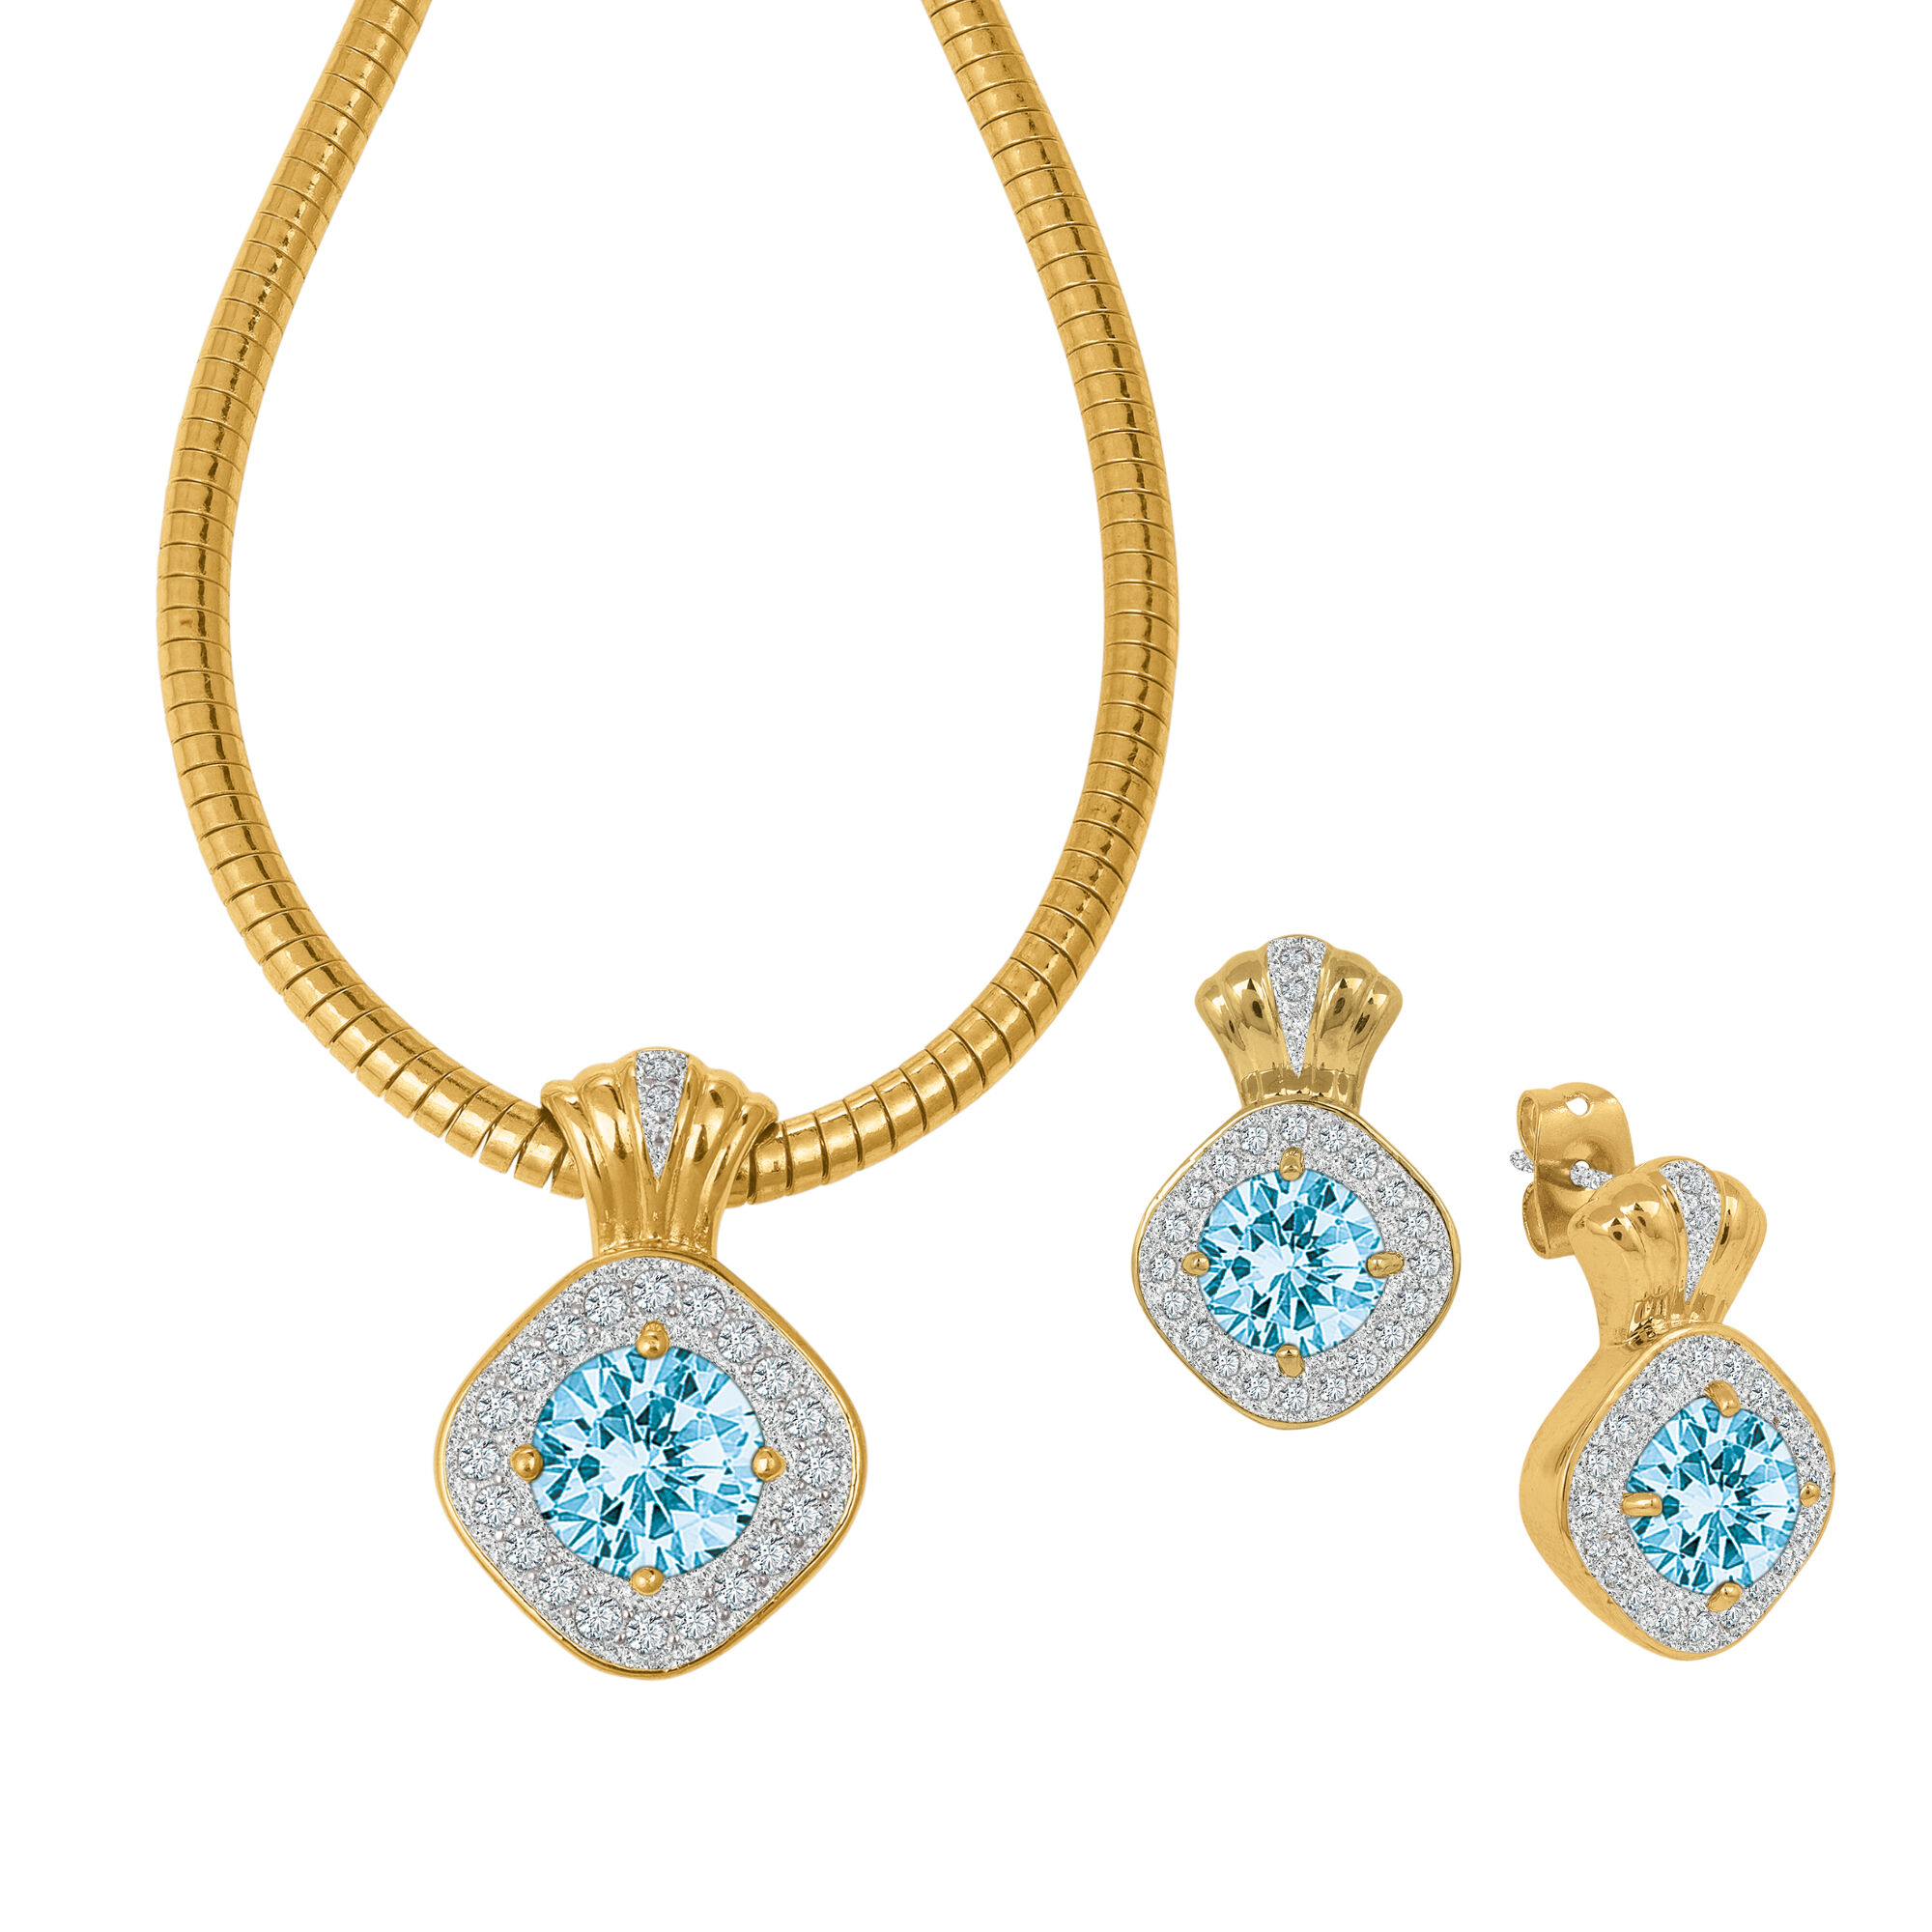 Birthstone Necklace Earring Set 10787 0016 c march